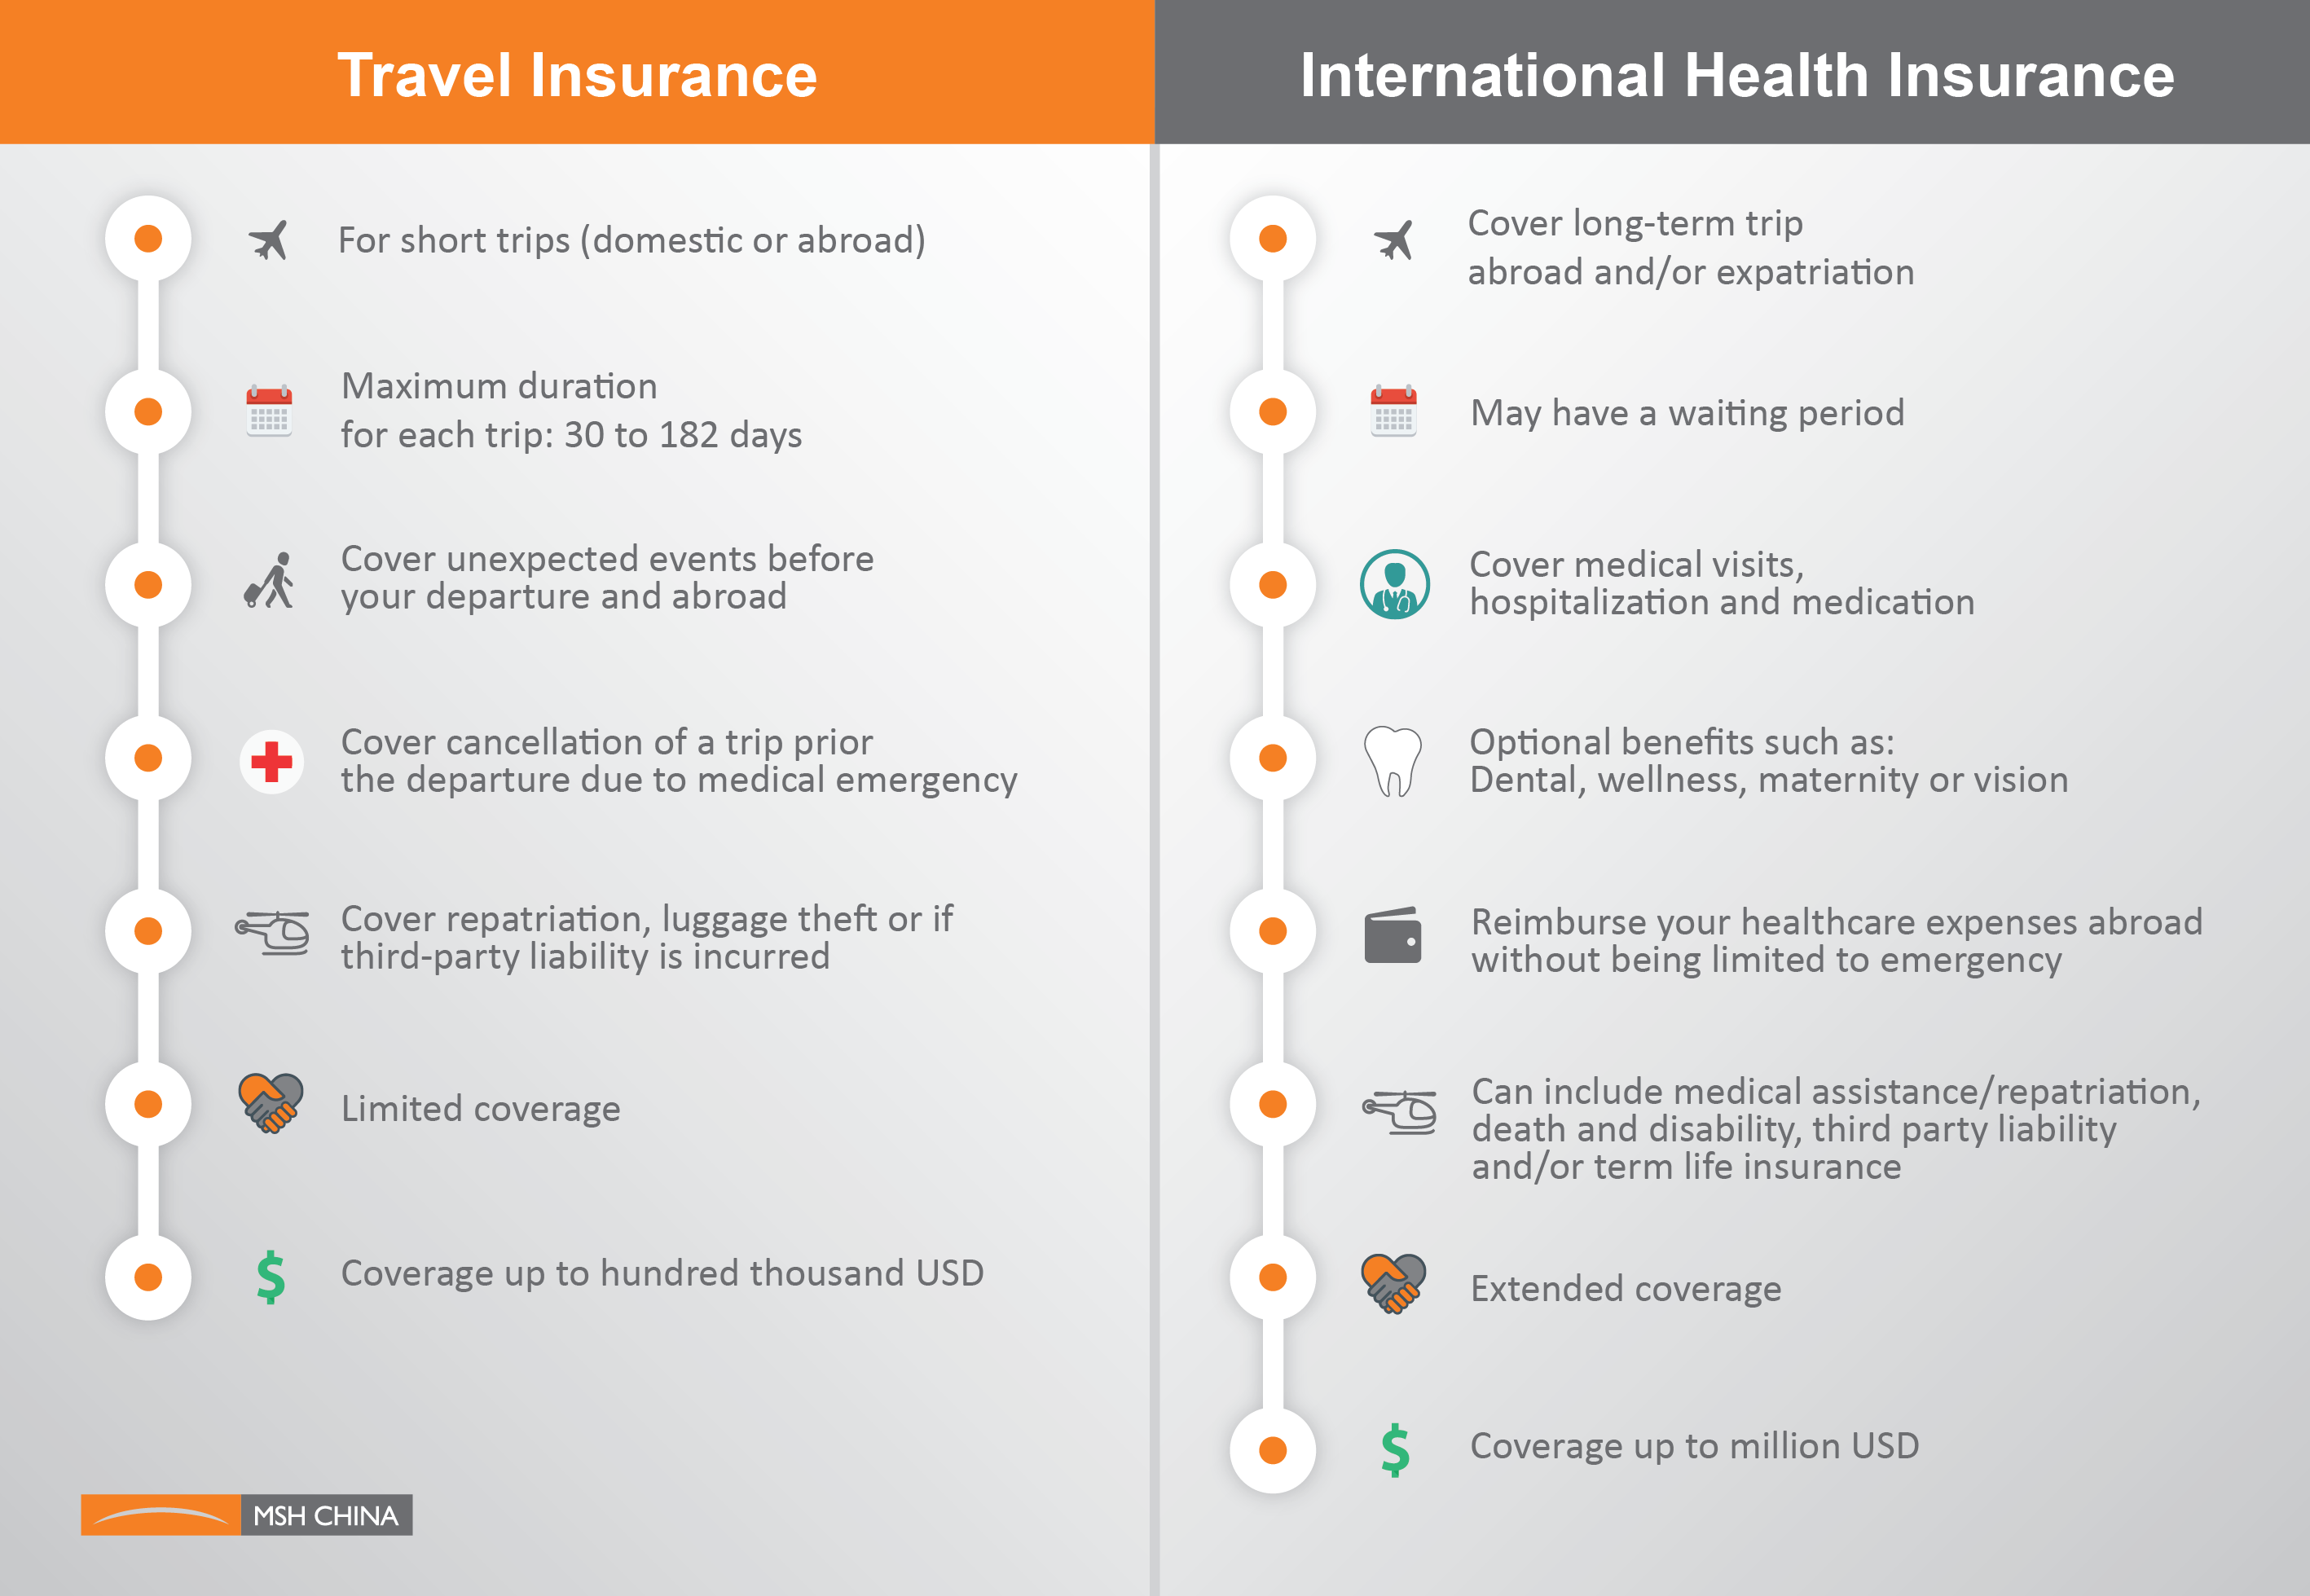 Who buys international health insurance coverage? - Expat Financial